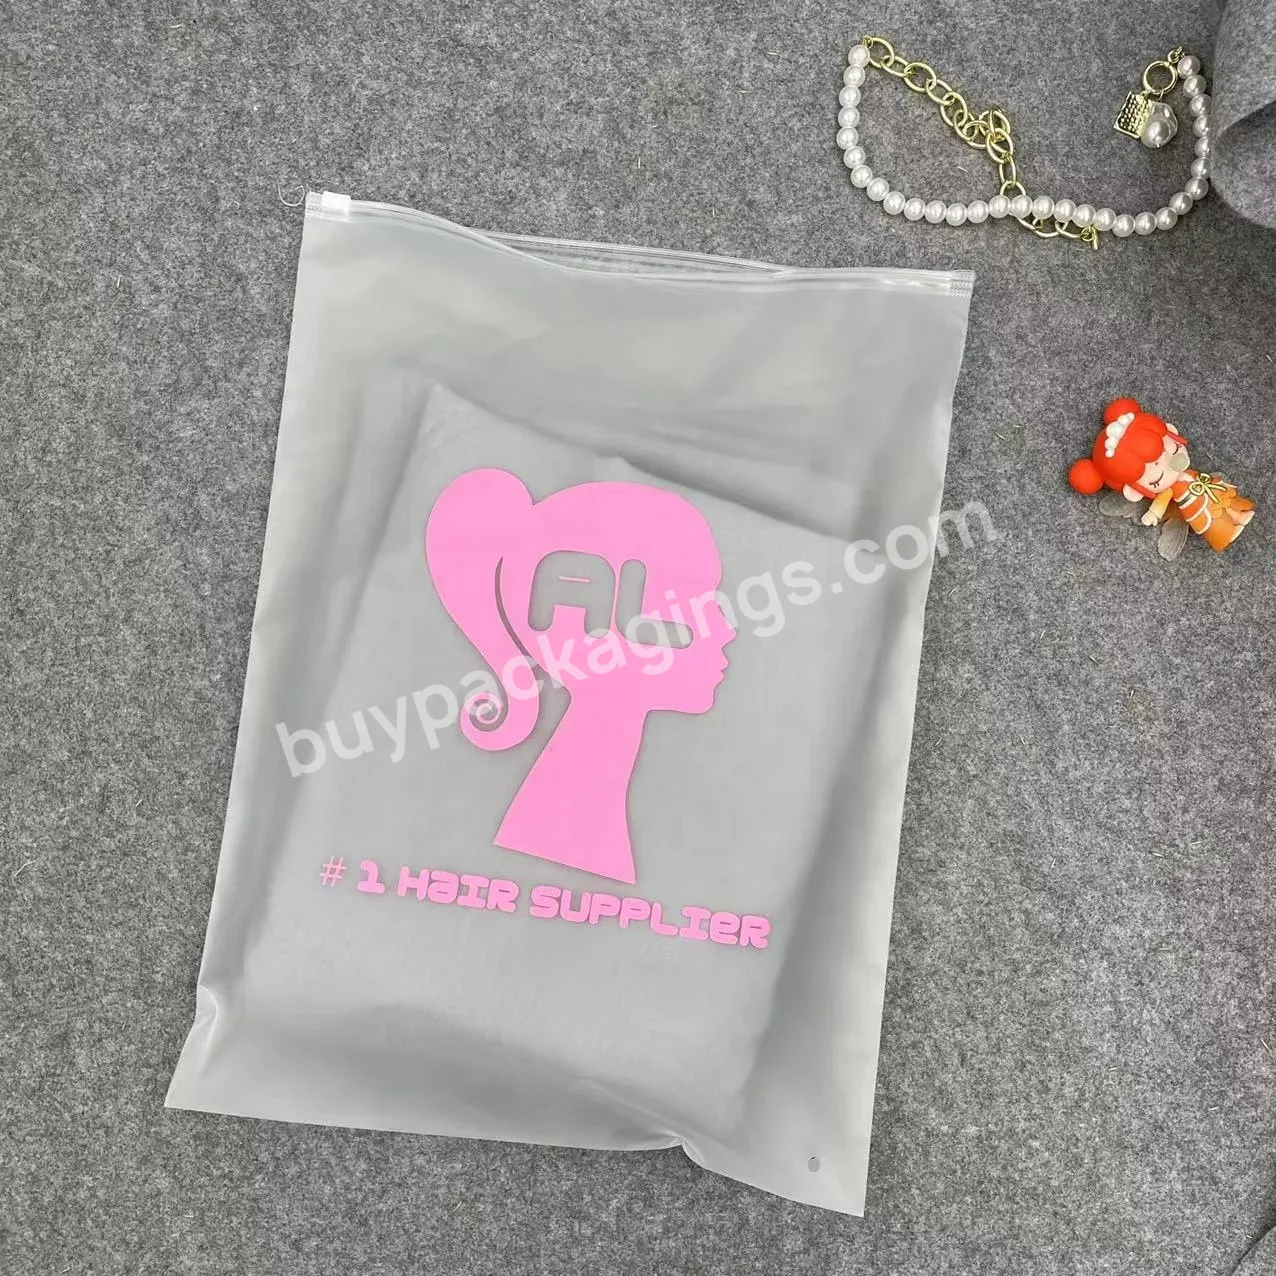 High Quality Customized Printed Frosted Matte Recyclable Plastic Zipper Bag For Clothing Packaging - Buy Customized Printed Zipper Bag,Frosted Zipper Bag,Plastic Zipper Bag For Clothing Packaging.